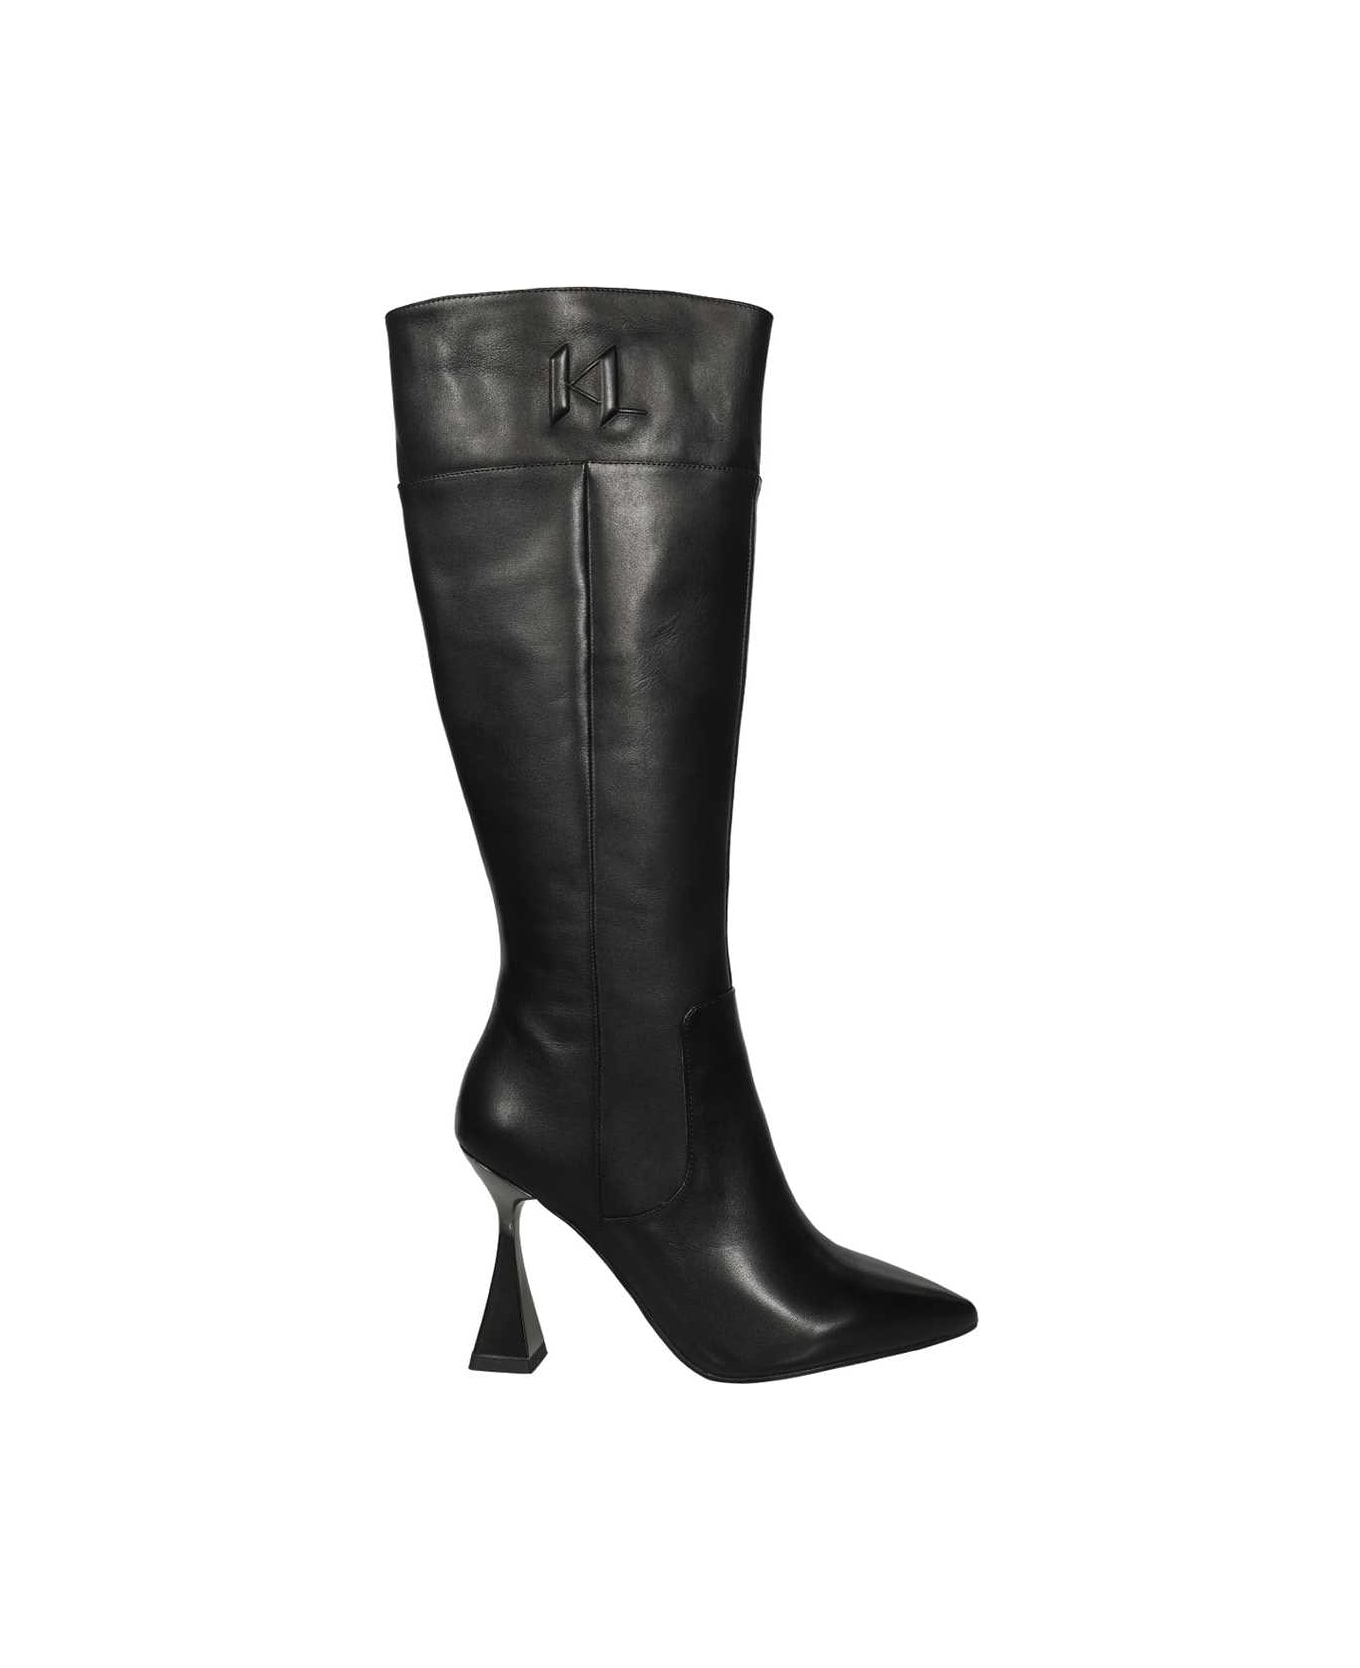 Karl Lagerfeld Leather Boots - black ブーツ